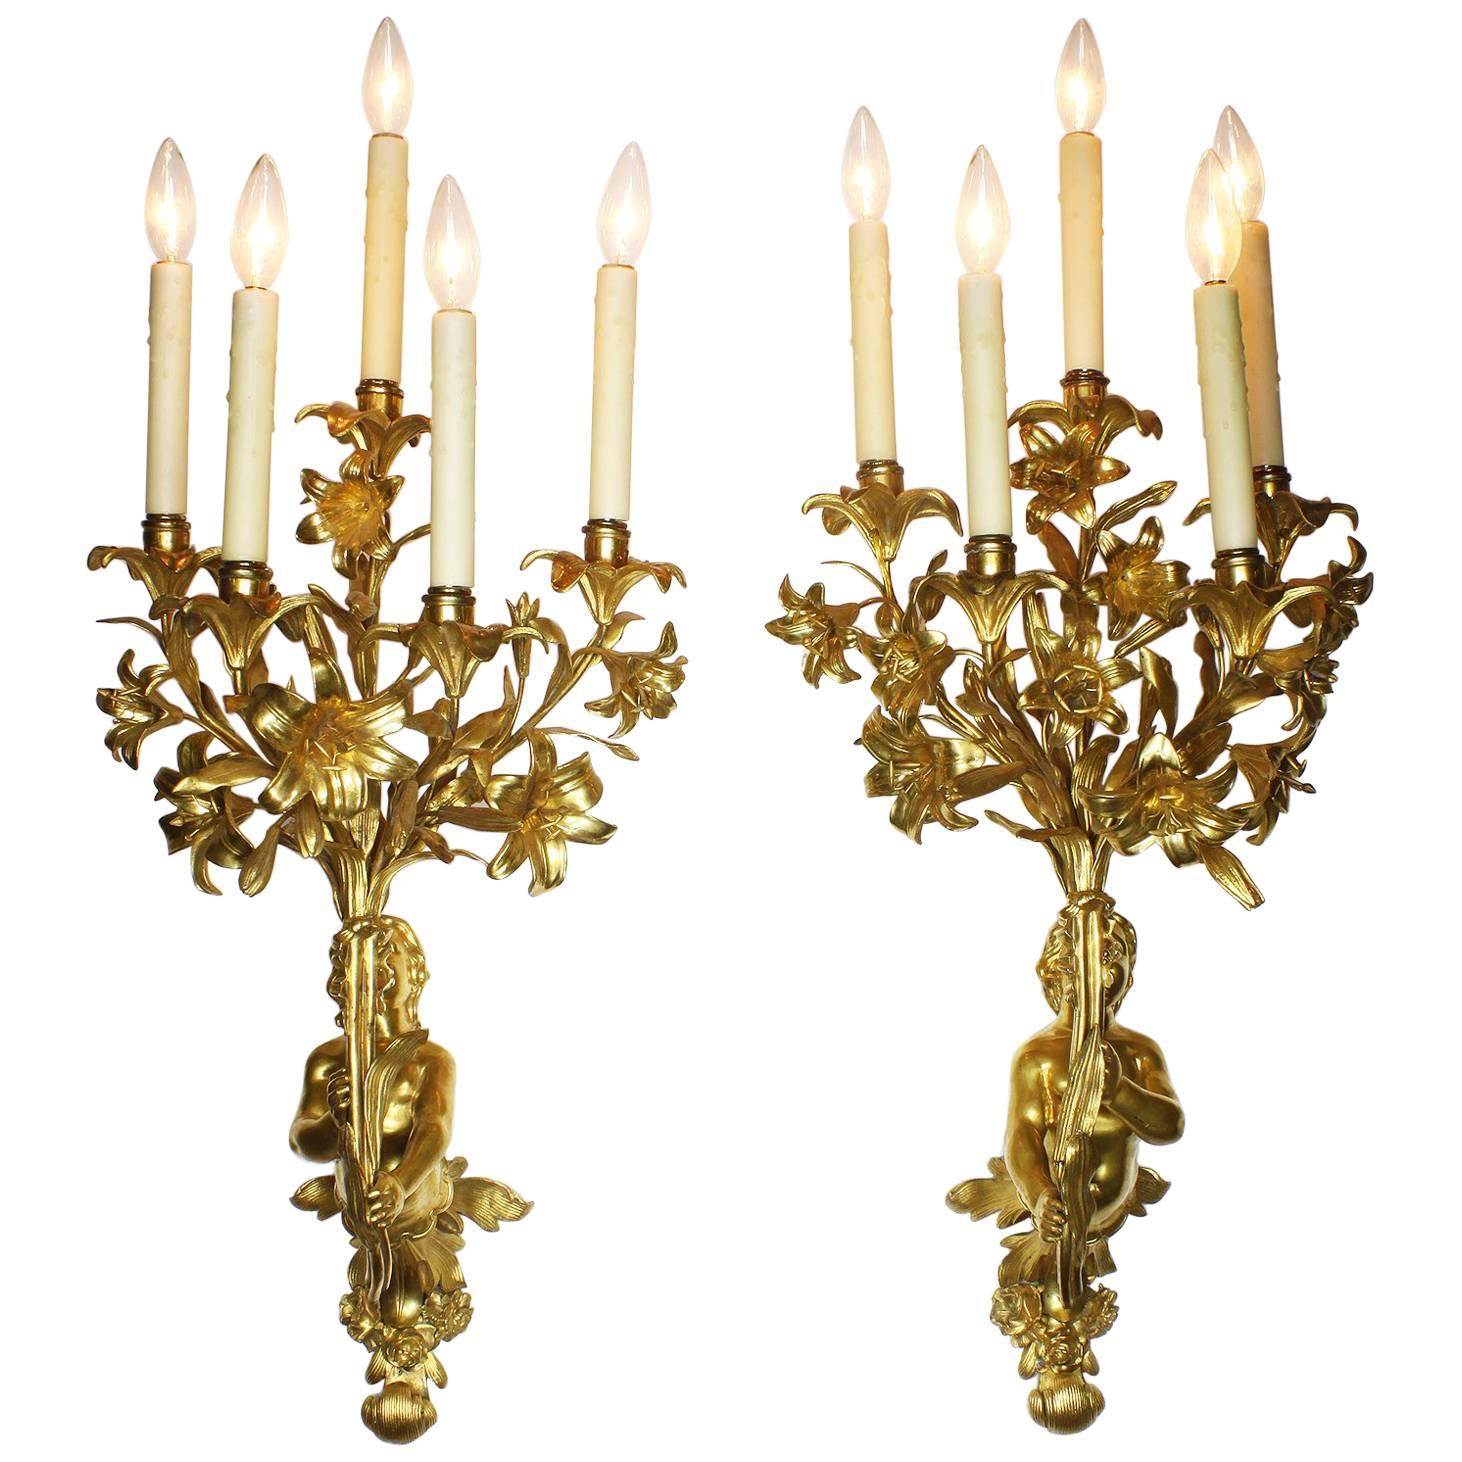 Pair of French 19th Century Neoclassical Style Gilt Bronze Putto Wall Lights For Sale